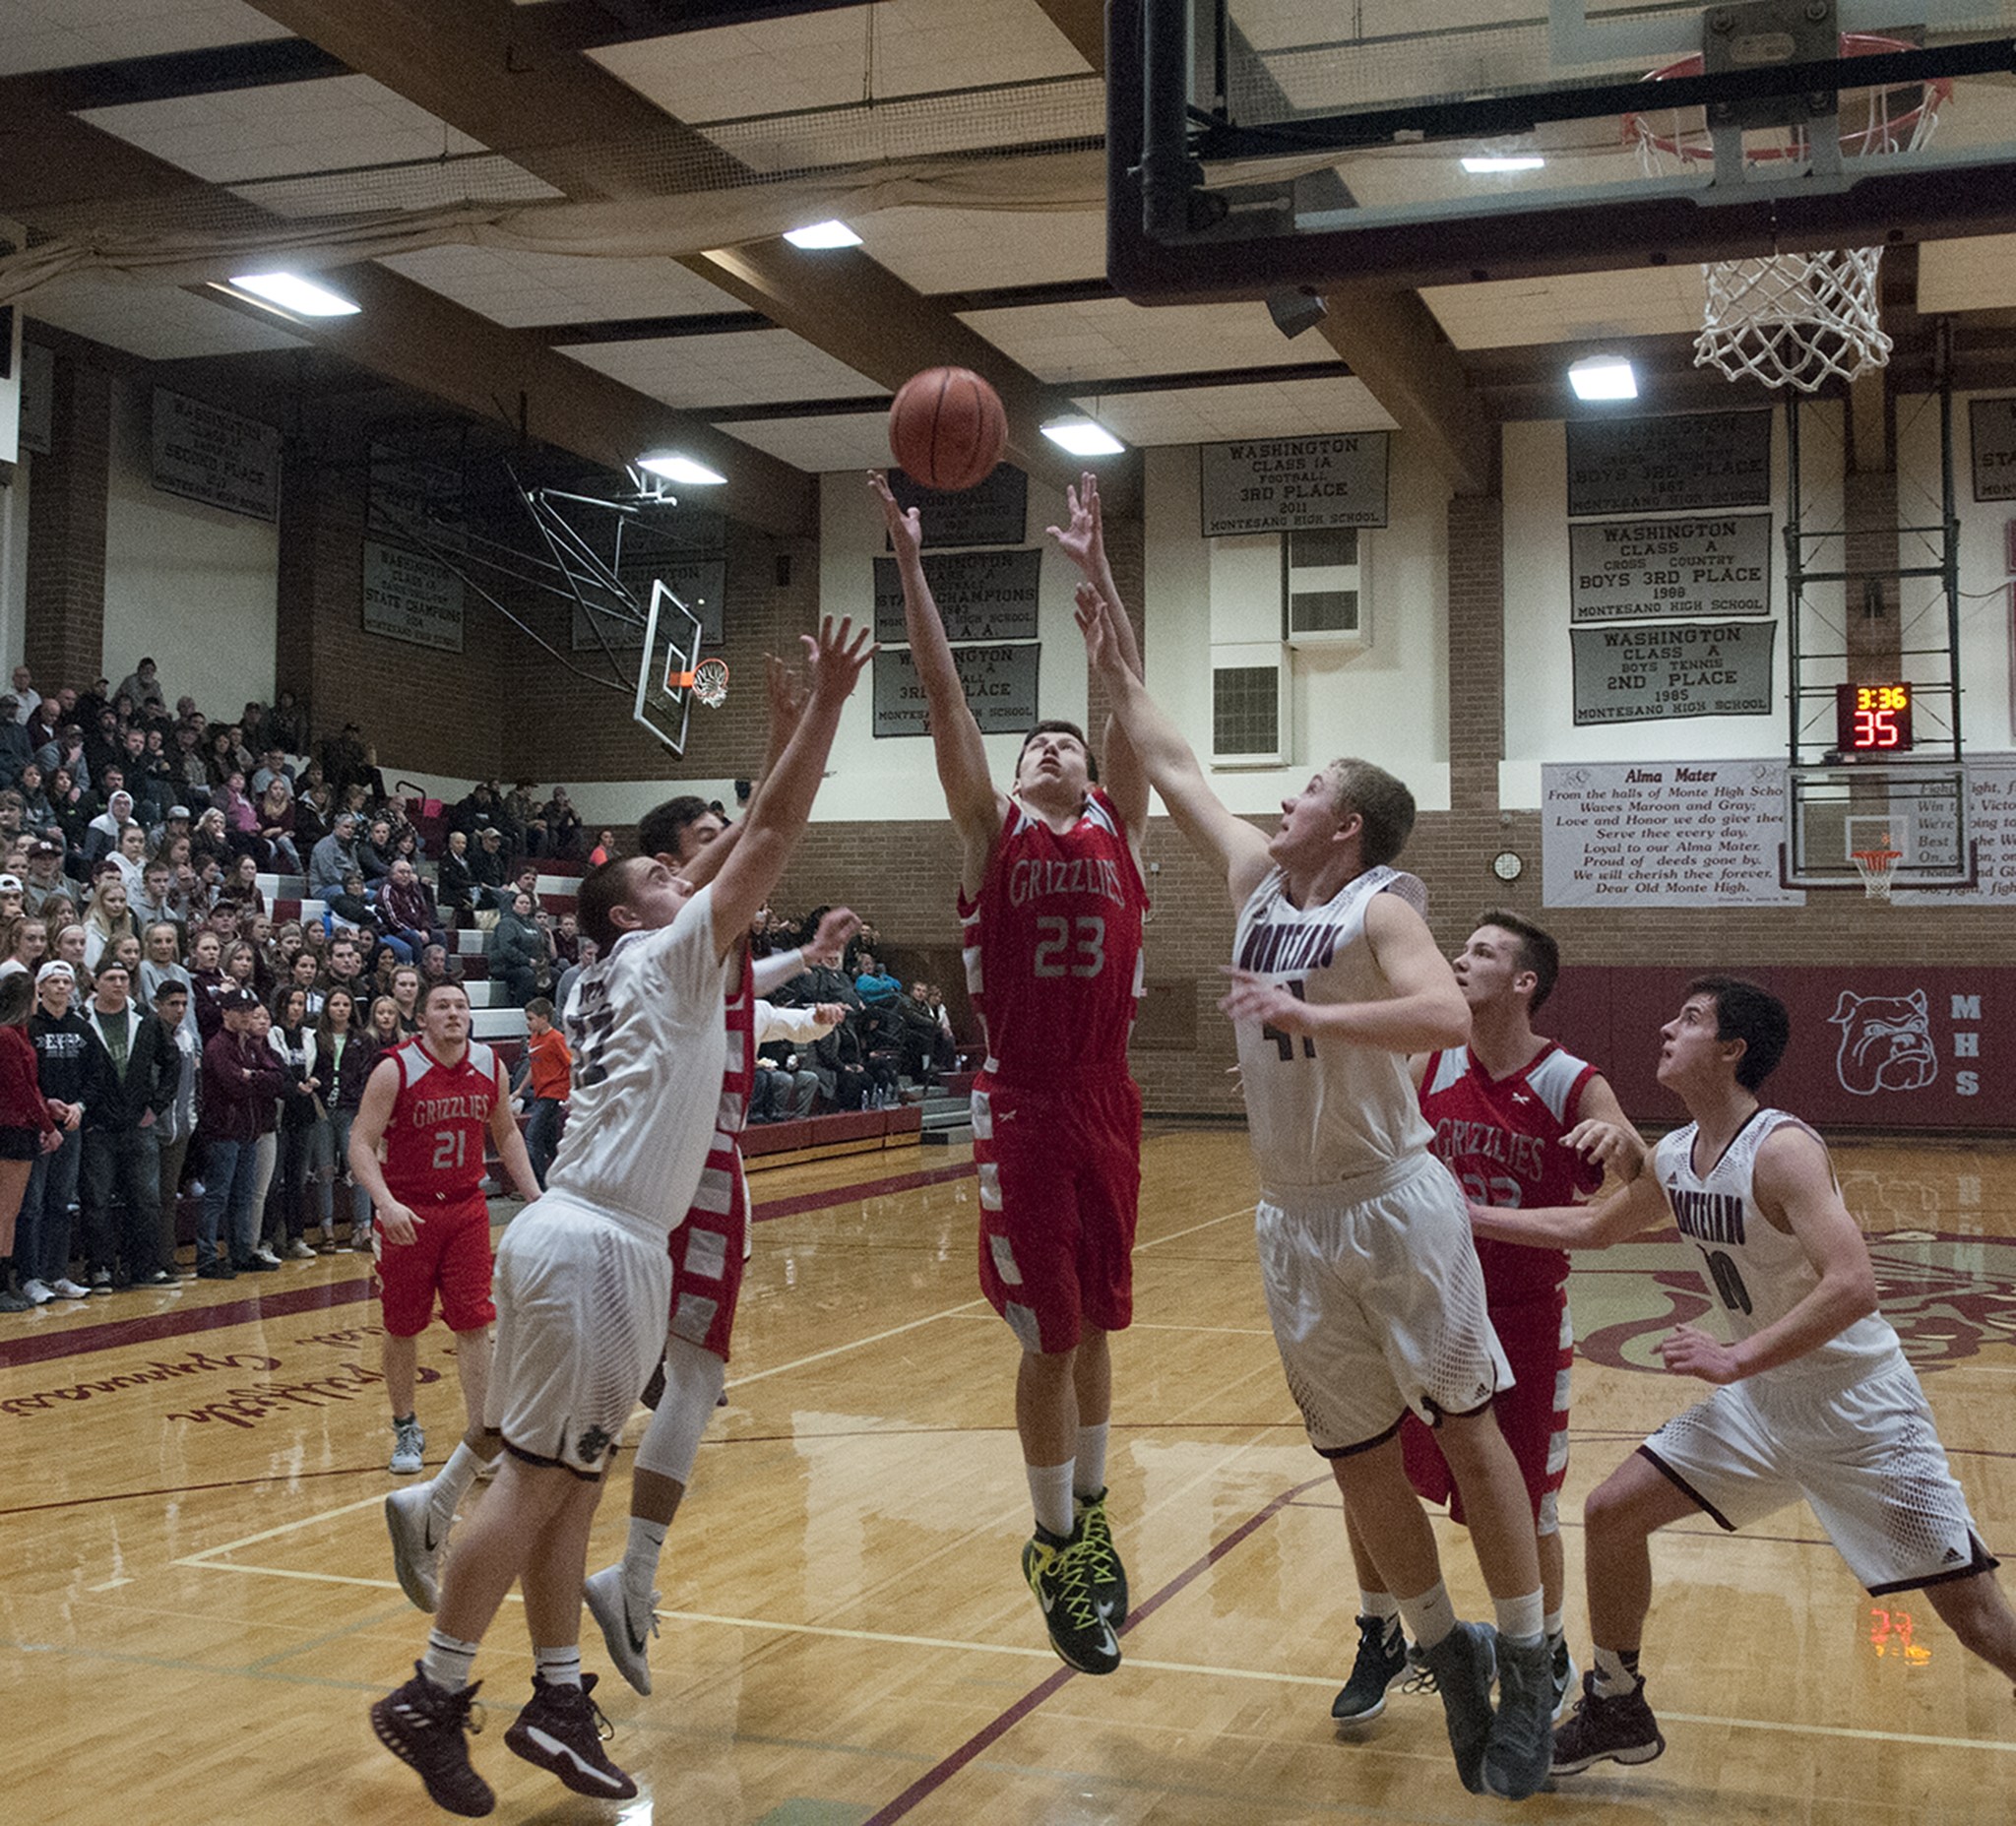 (Brendan Carl | The Daily World) Hoquiam’s Jack Adams III goes up for a rebound between Montesano’s Seth Dierkop (41) and LJ Valley (32) during an Evergreen 1A League game at Bo Griffith Gym on Thursday.